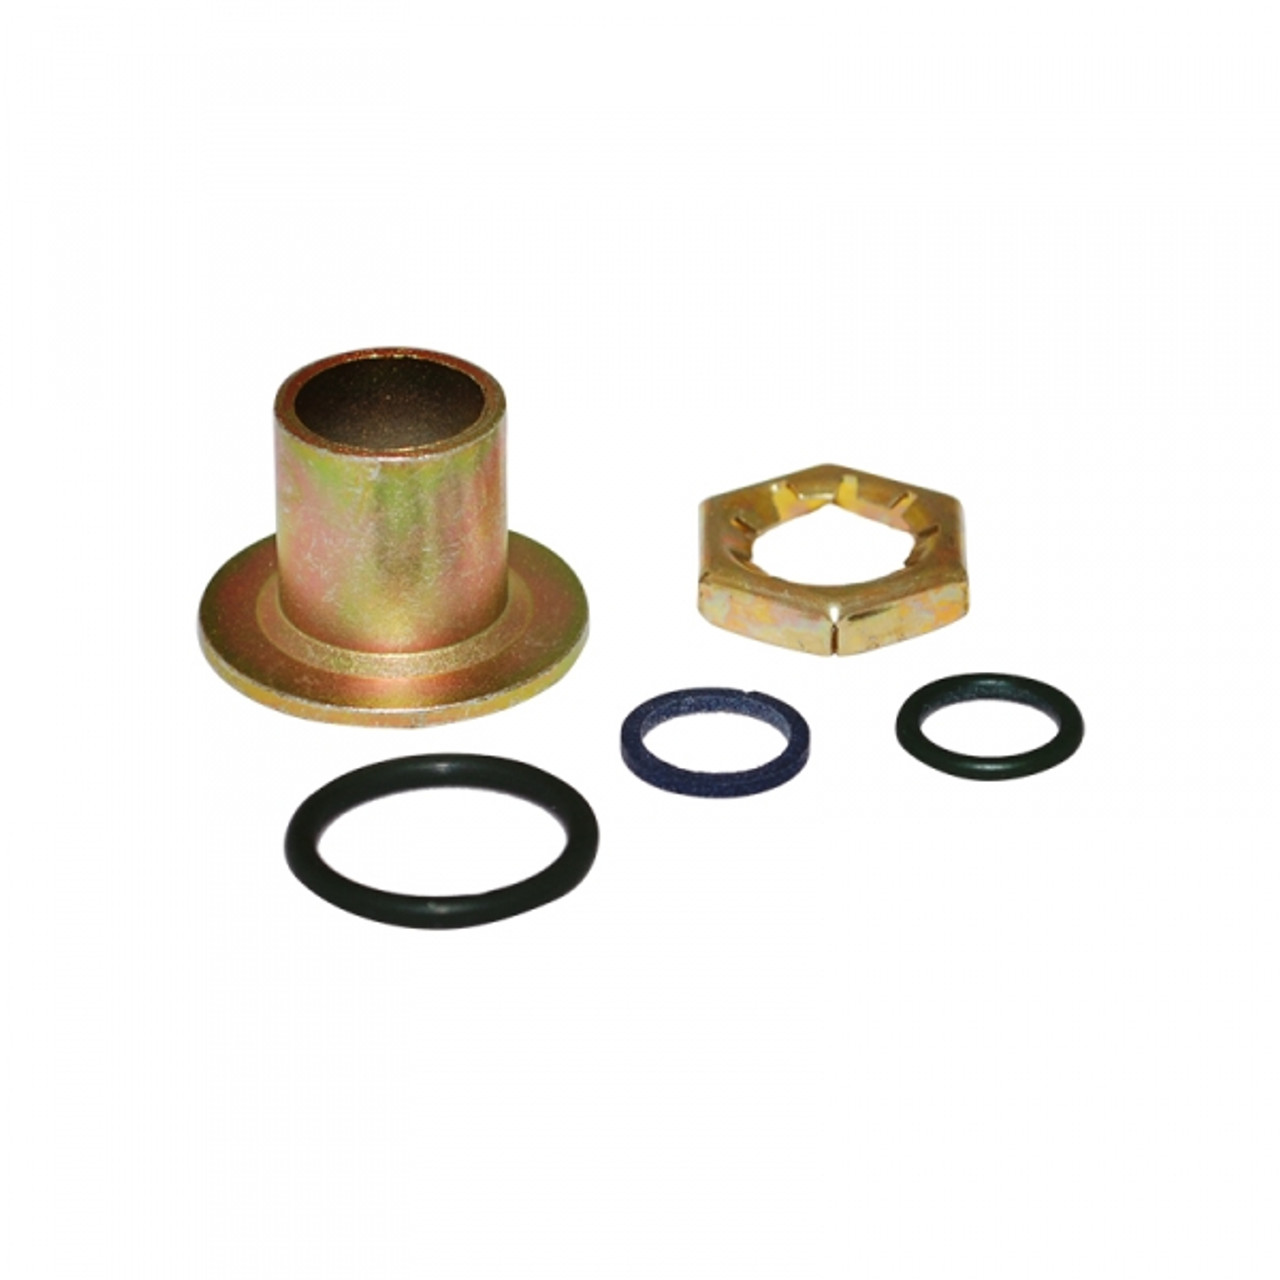 FORD INJECTION PRESSURE REGULATOR VALVE (IPR) SEAL KIT 1994 to 2003 7.3L POWERSTROKE (FO4C3Z-9C977-AA)-Main View